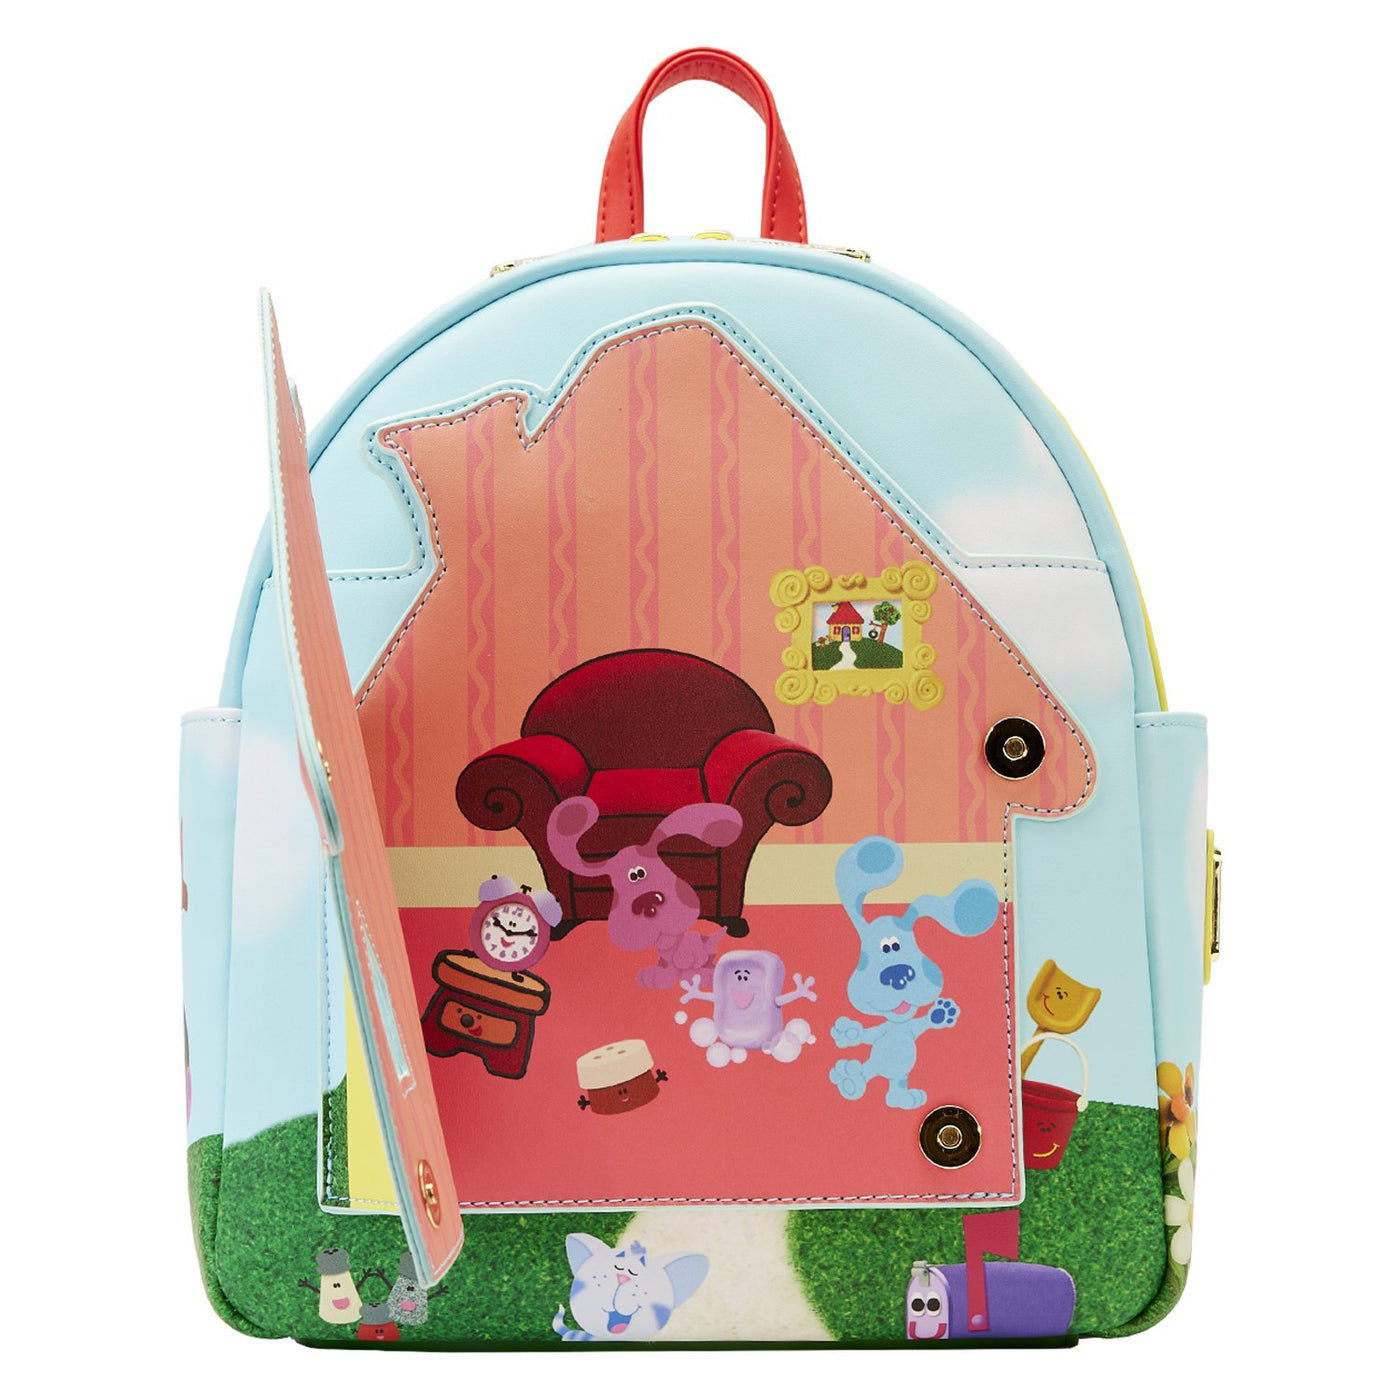 671803451001 - Loungefly Nickelodeon Blues Clues Open House Mini Backpack - Open House